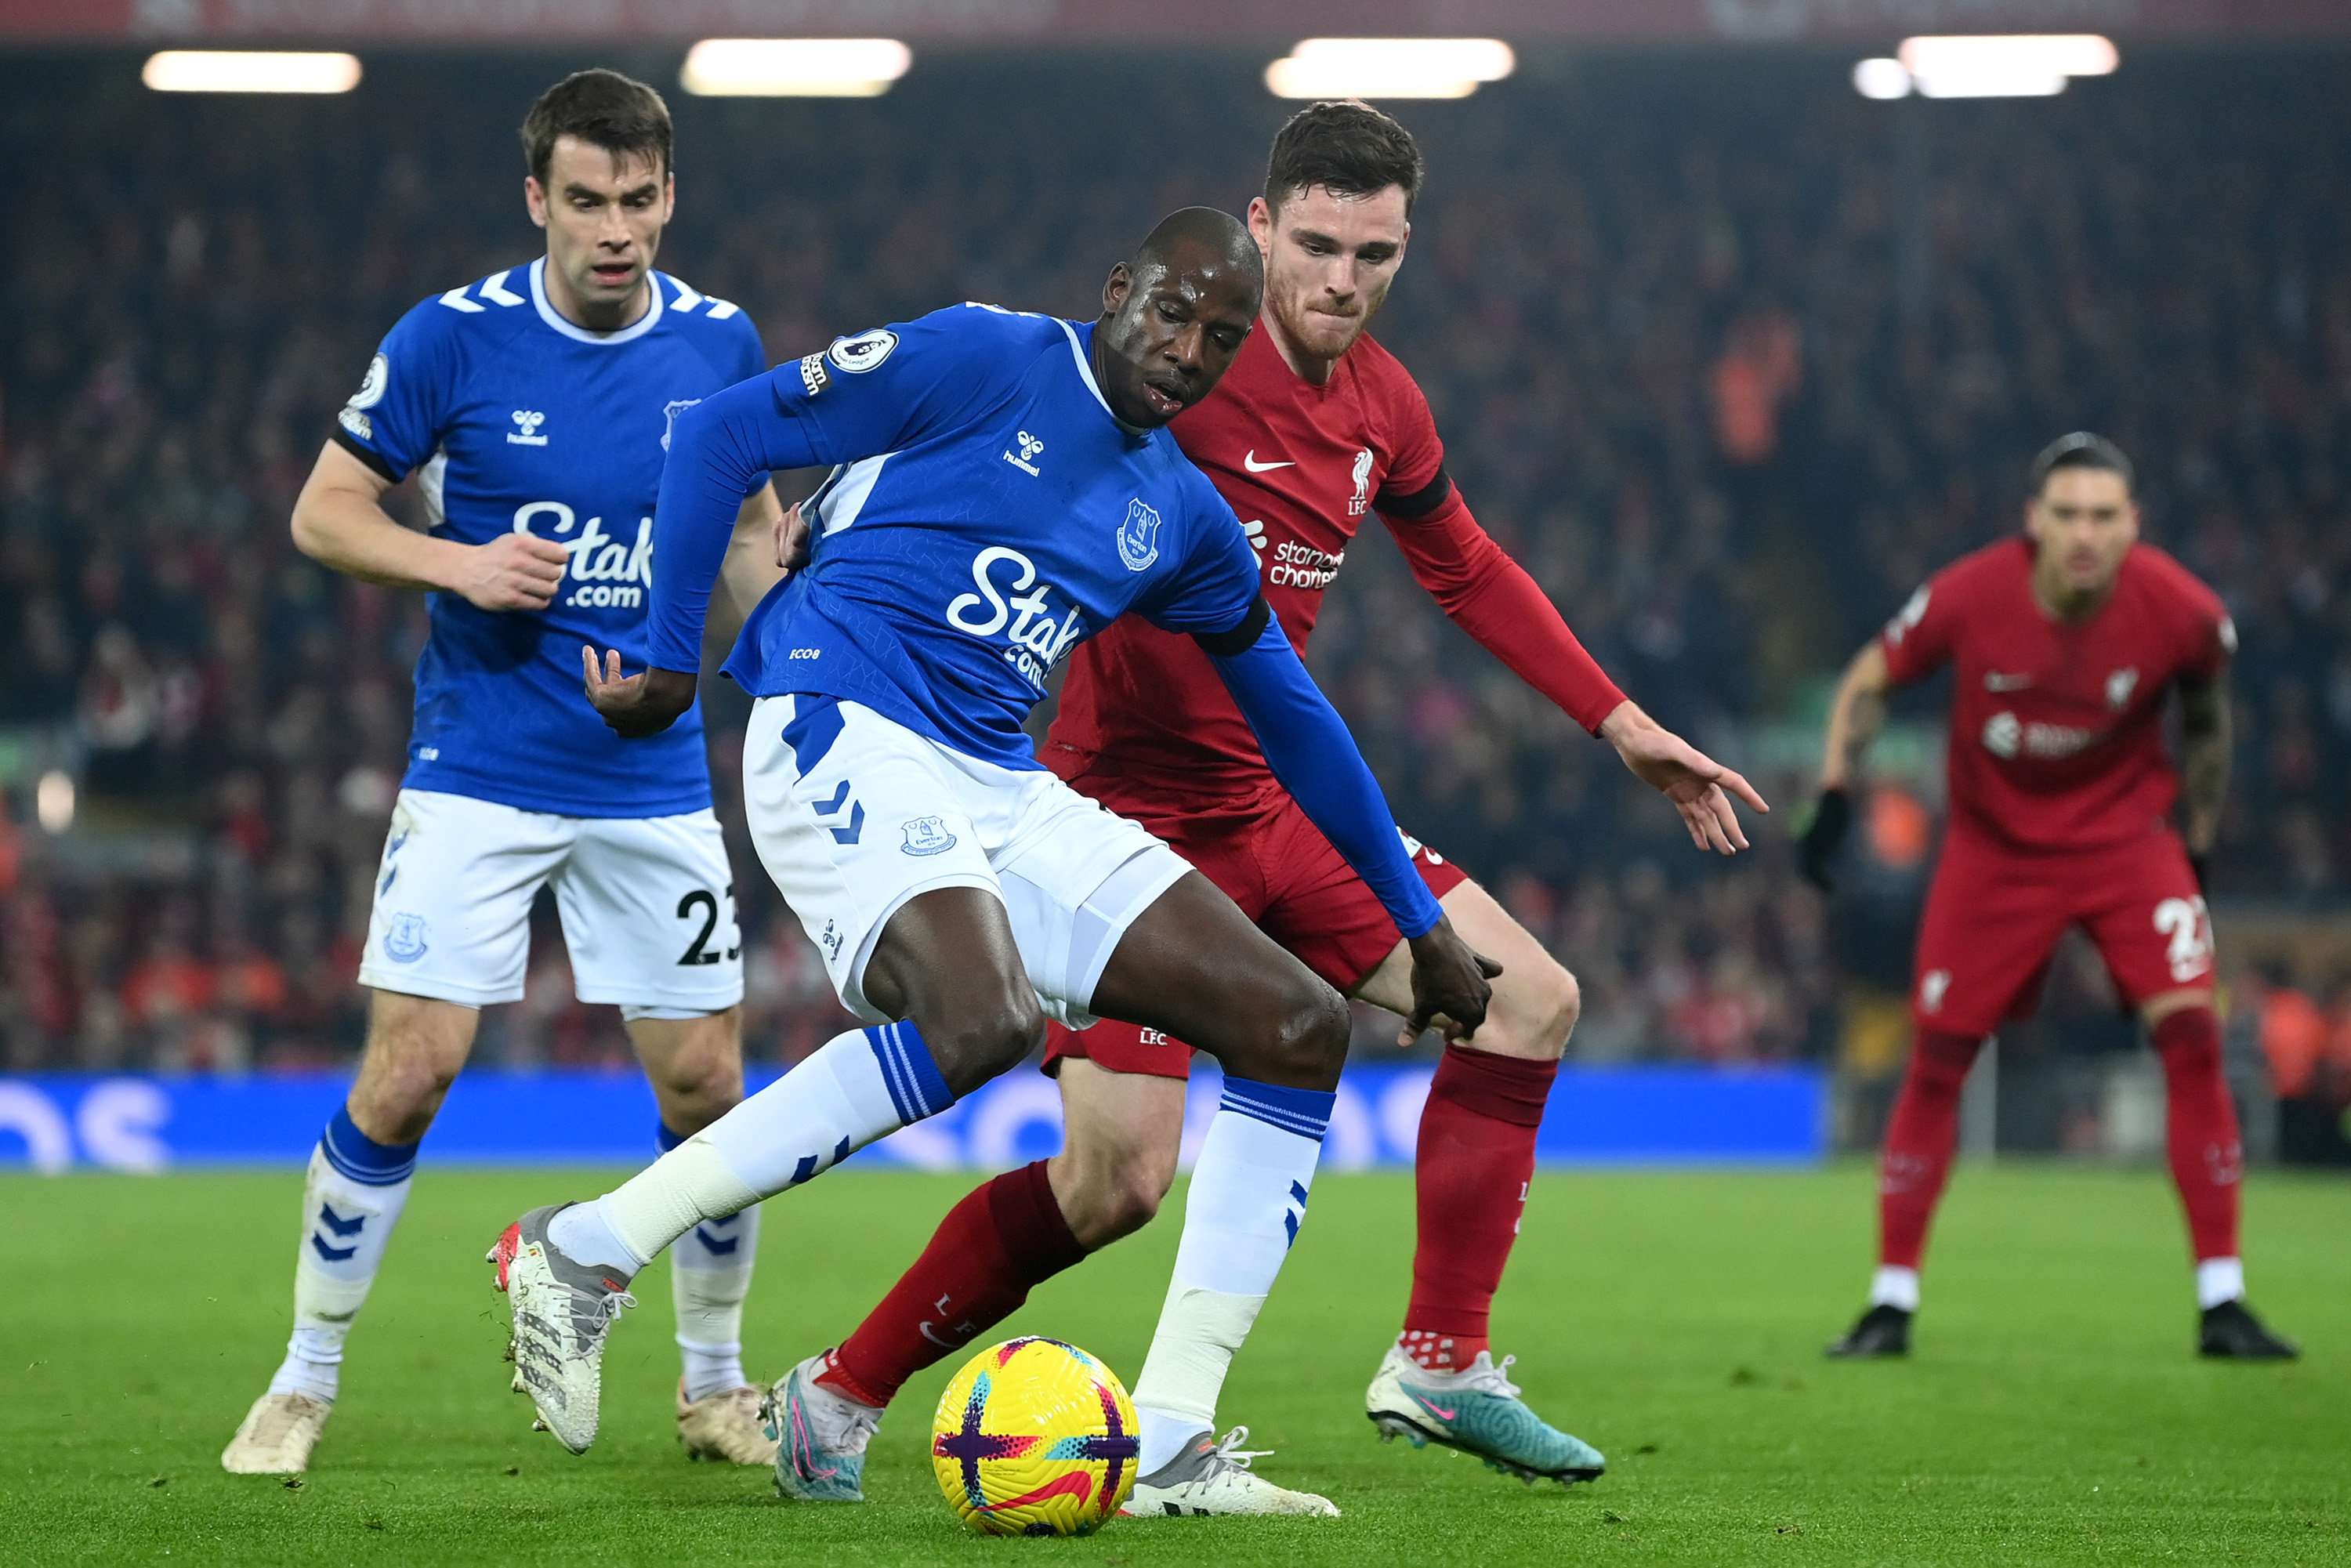 Miami Investor 777 Partners Weighs Buying Stake in Everton Football Club